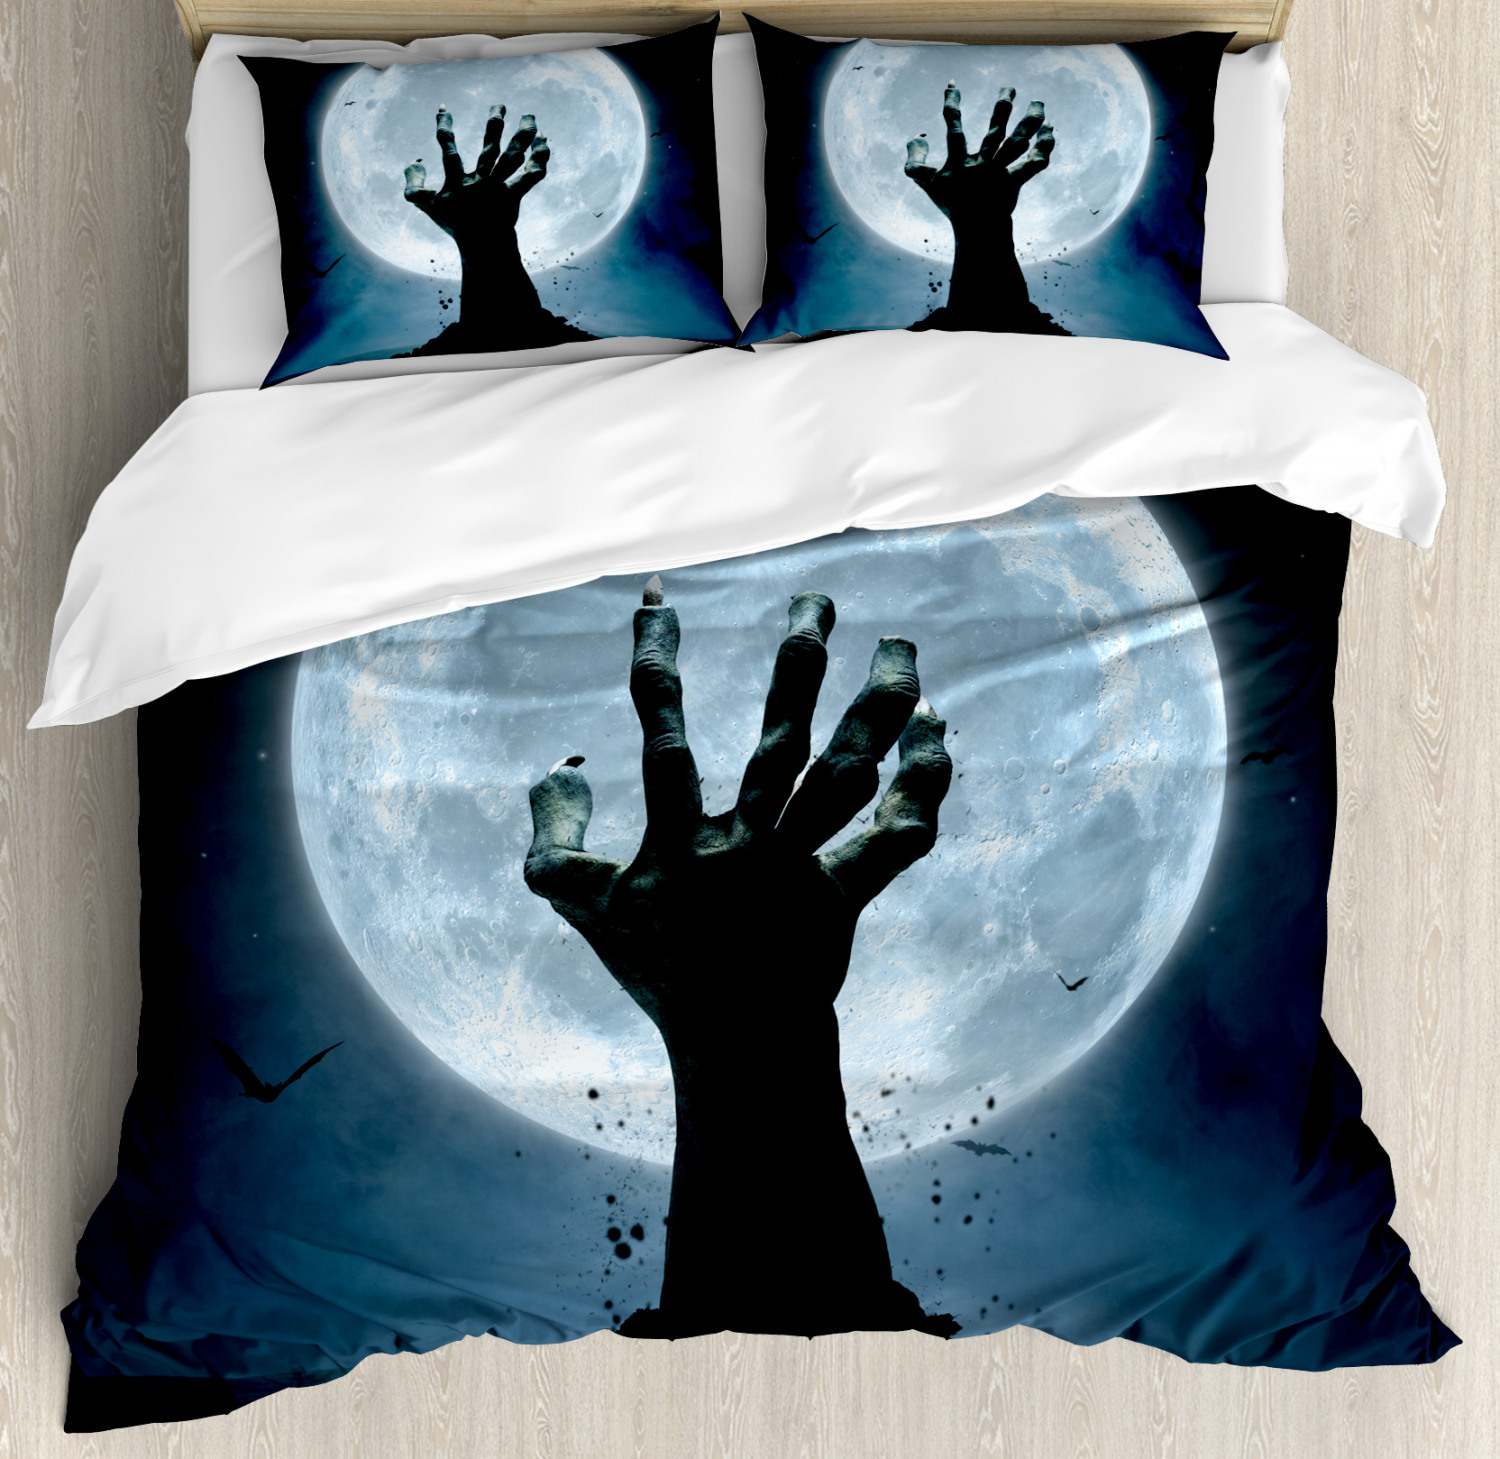 Halloween Duvet Cover Set With Pillow Shams Zombie Grave Print For